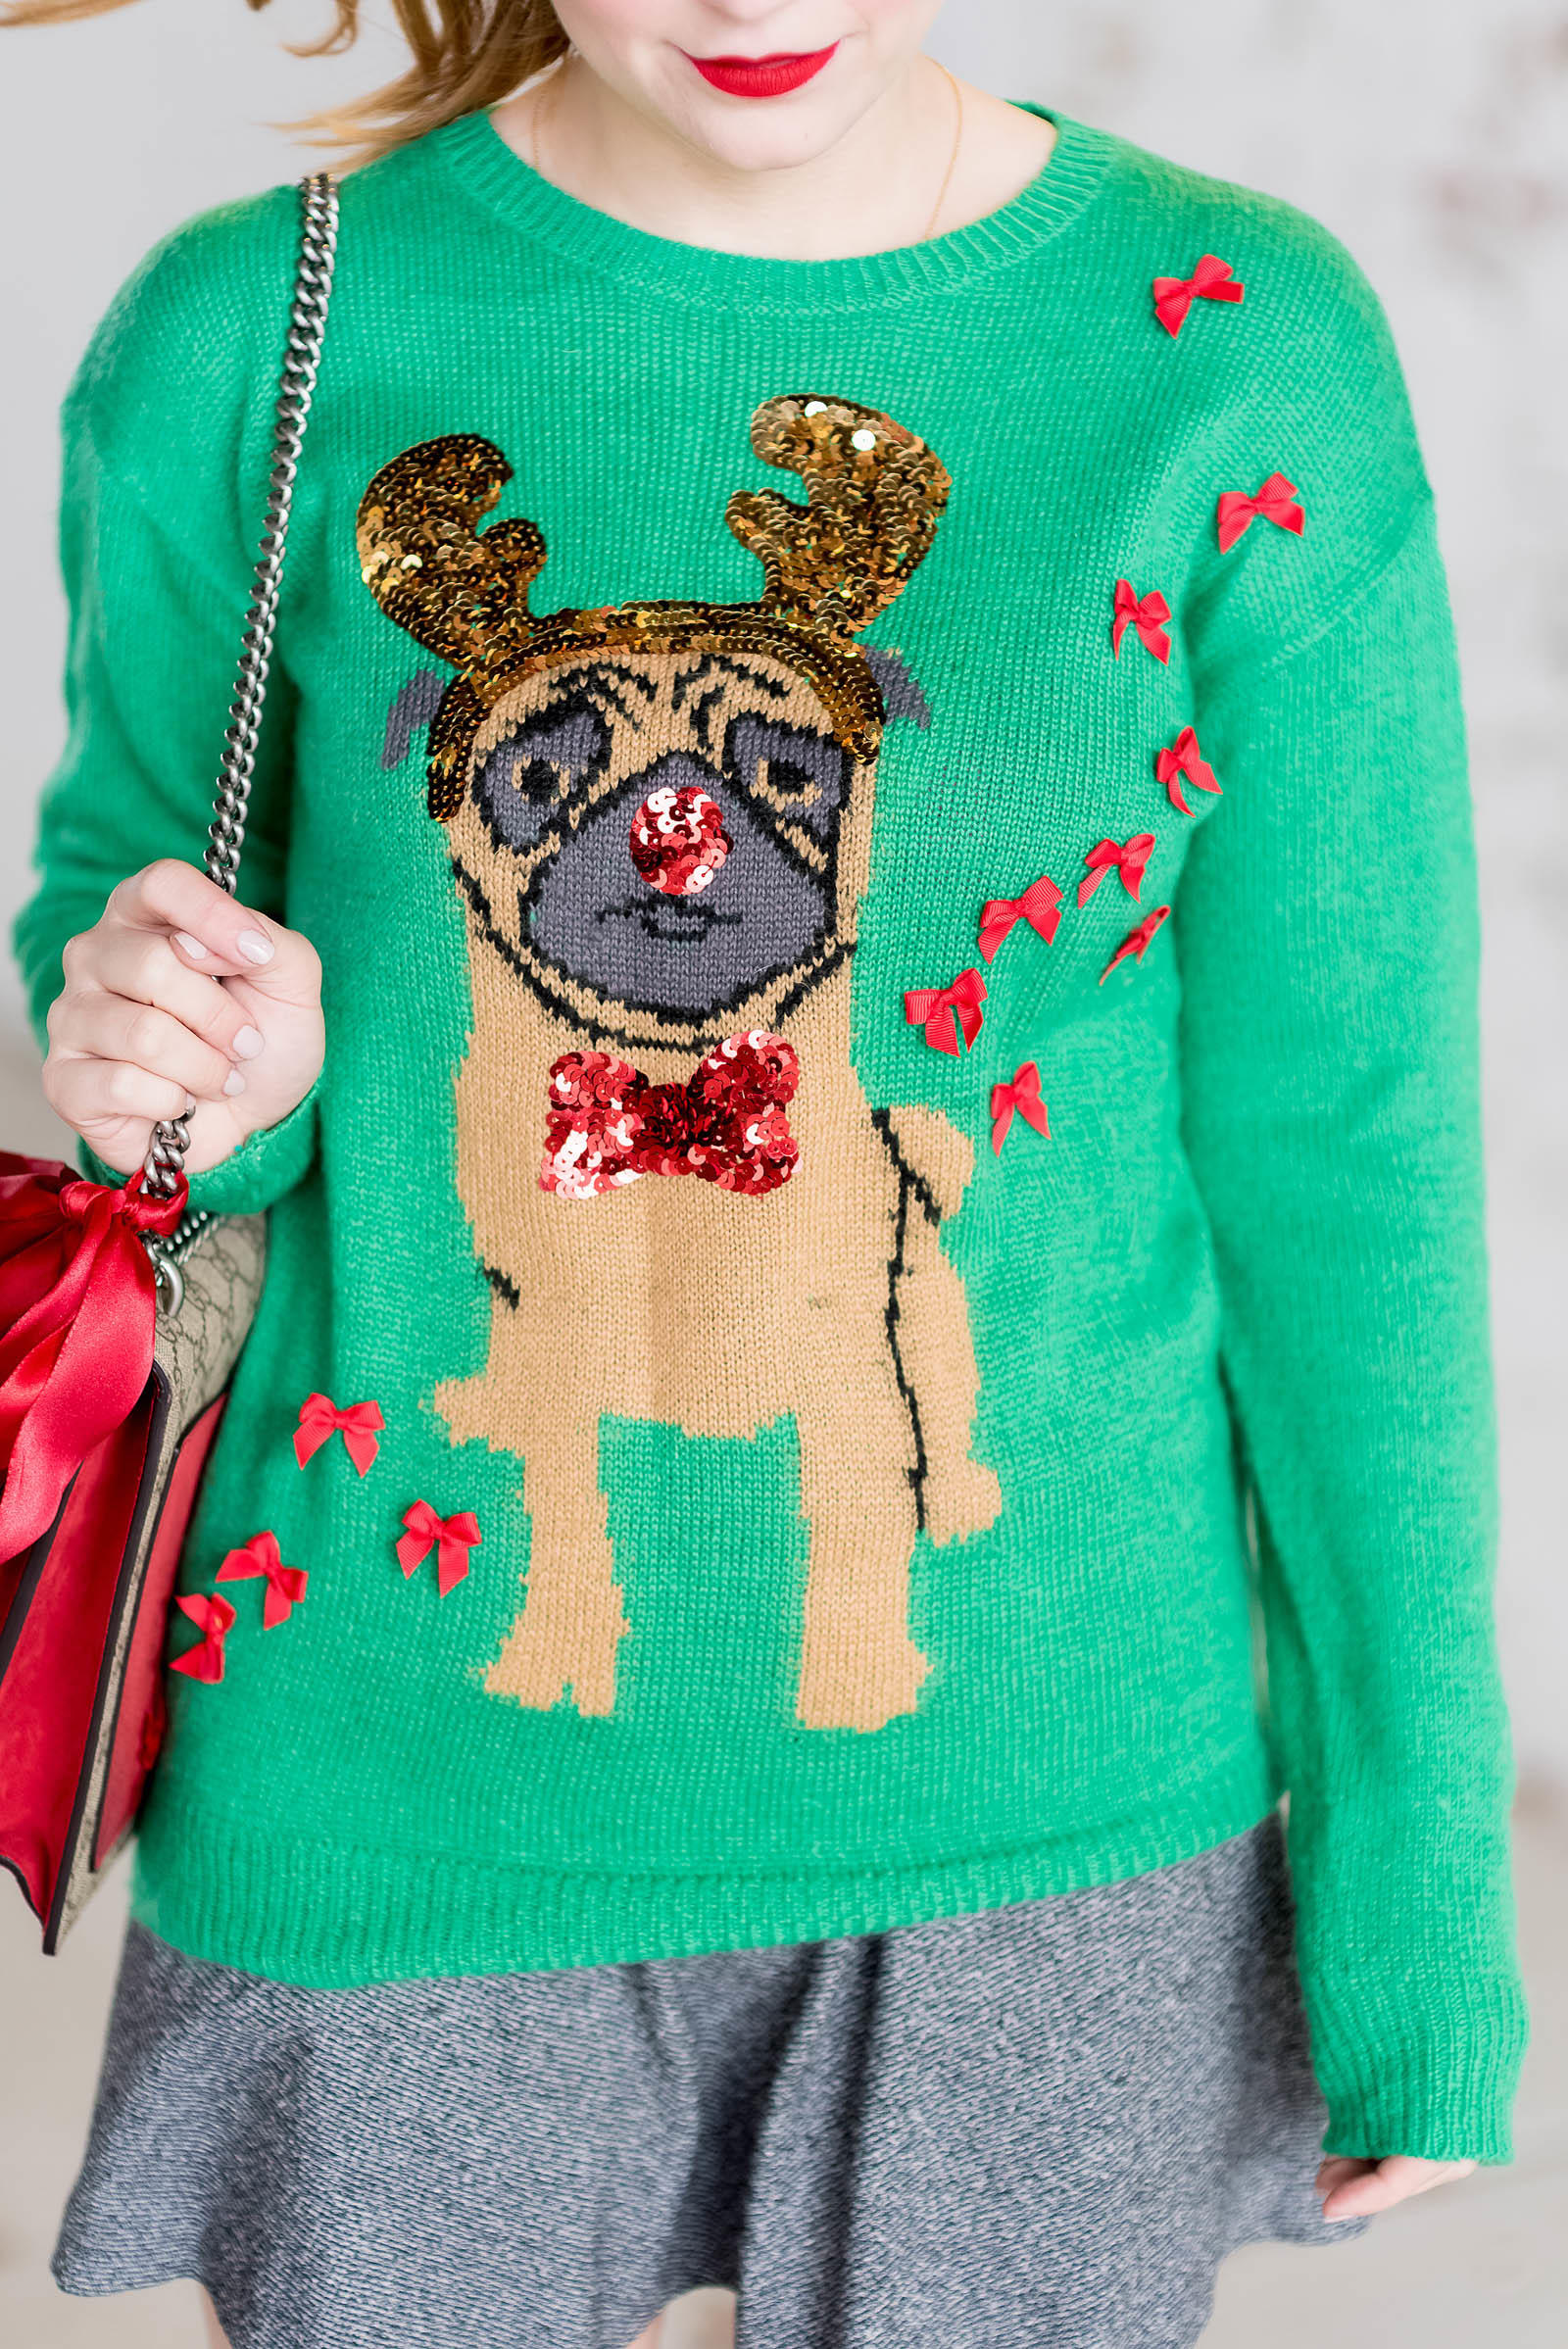 How to Style An Ugly Christmas Sweater